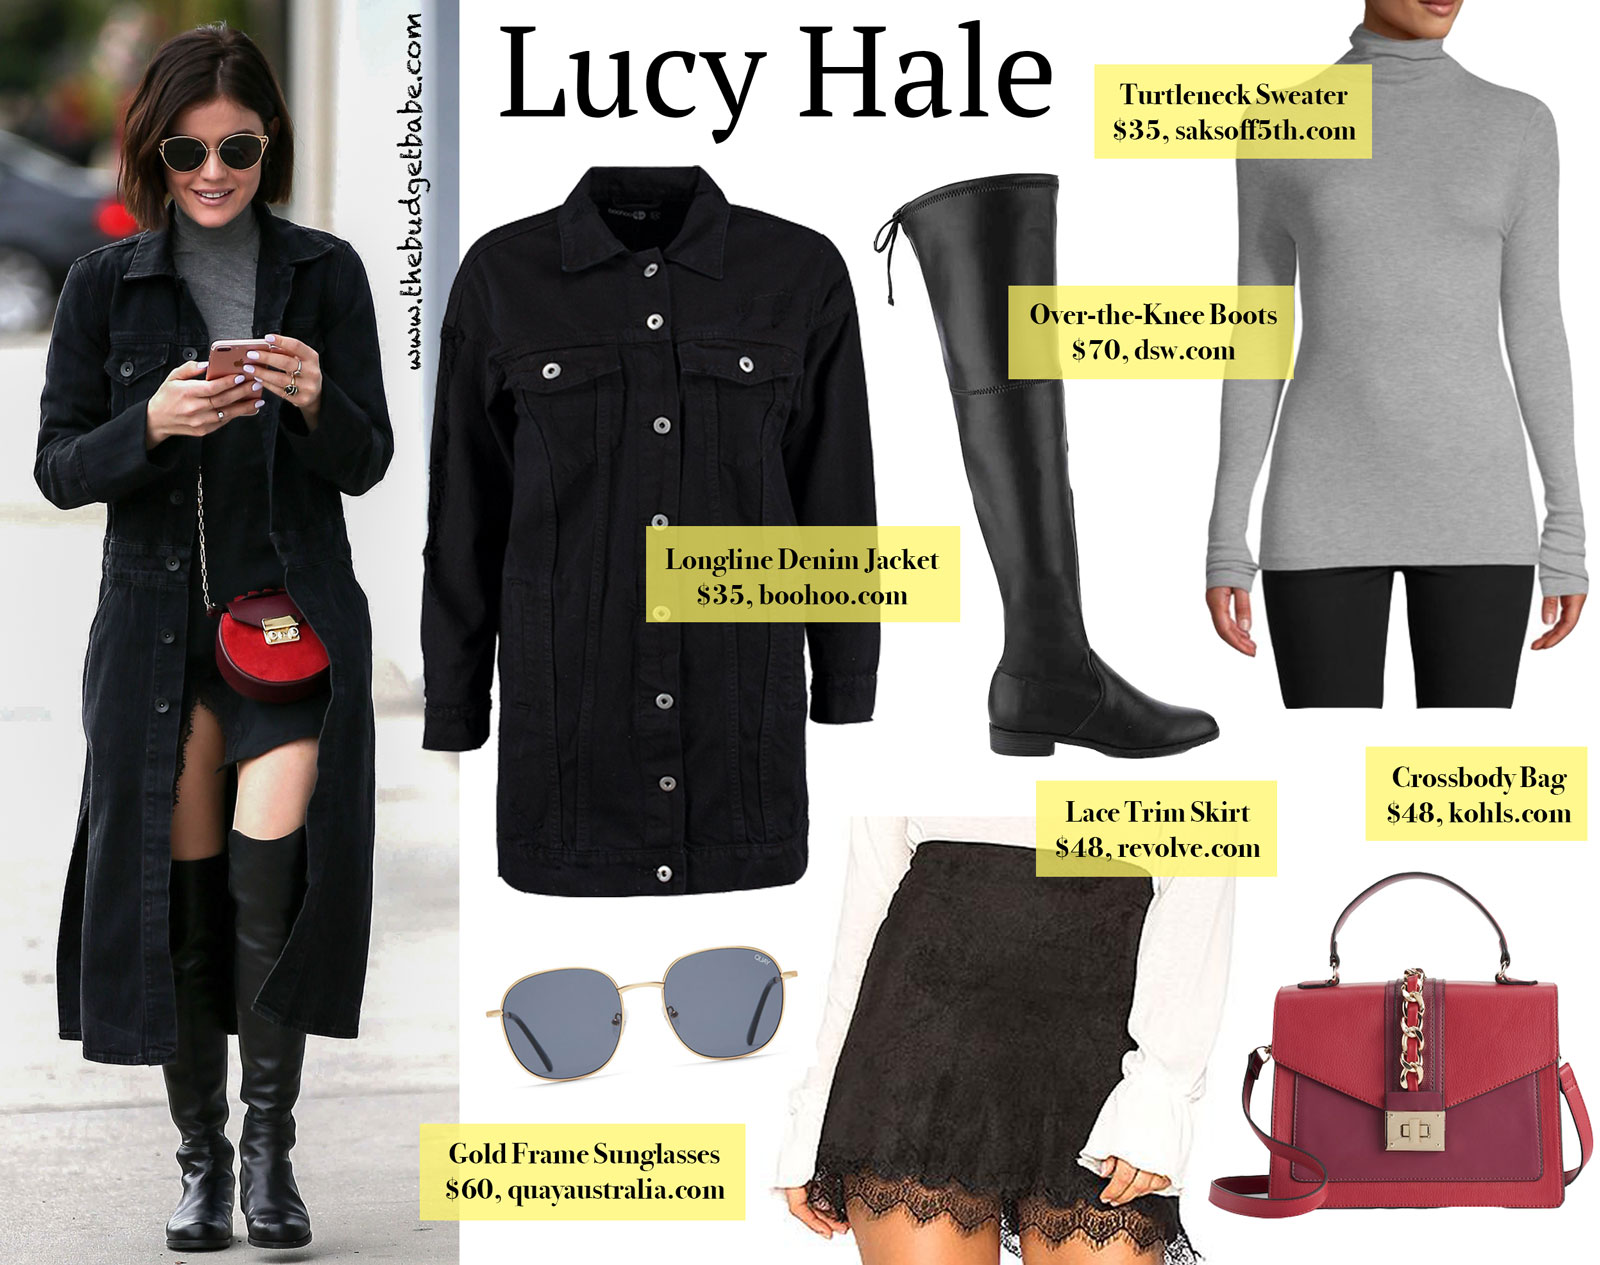 Lucy Hale Long Denim Jacket and Over the Knee Boots Look for Less